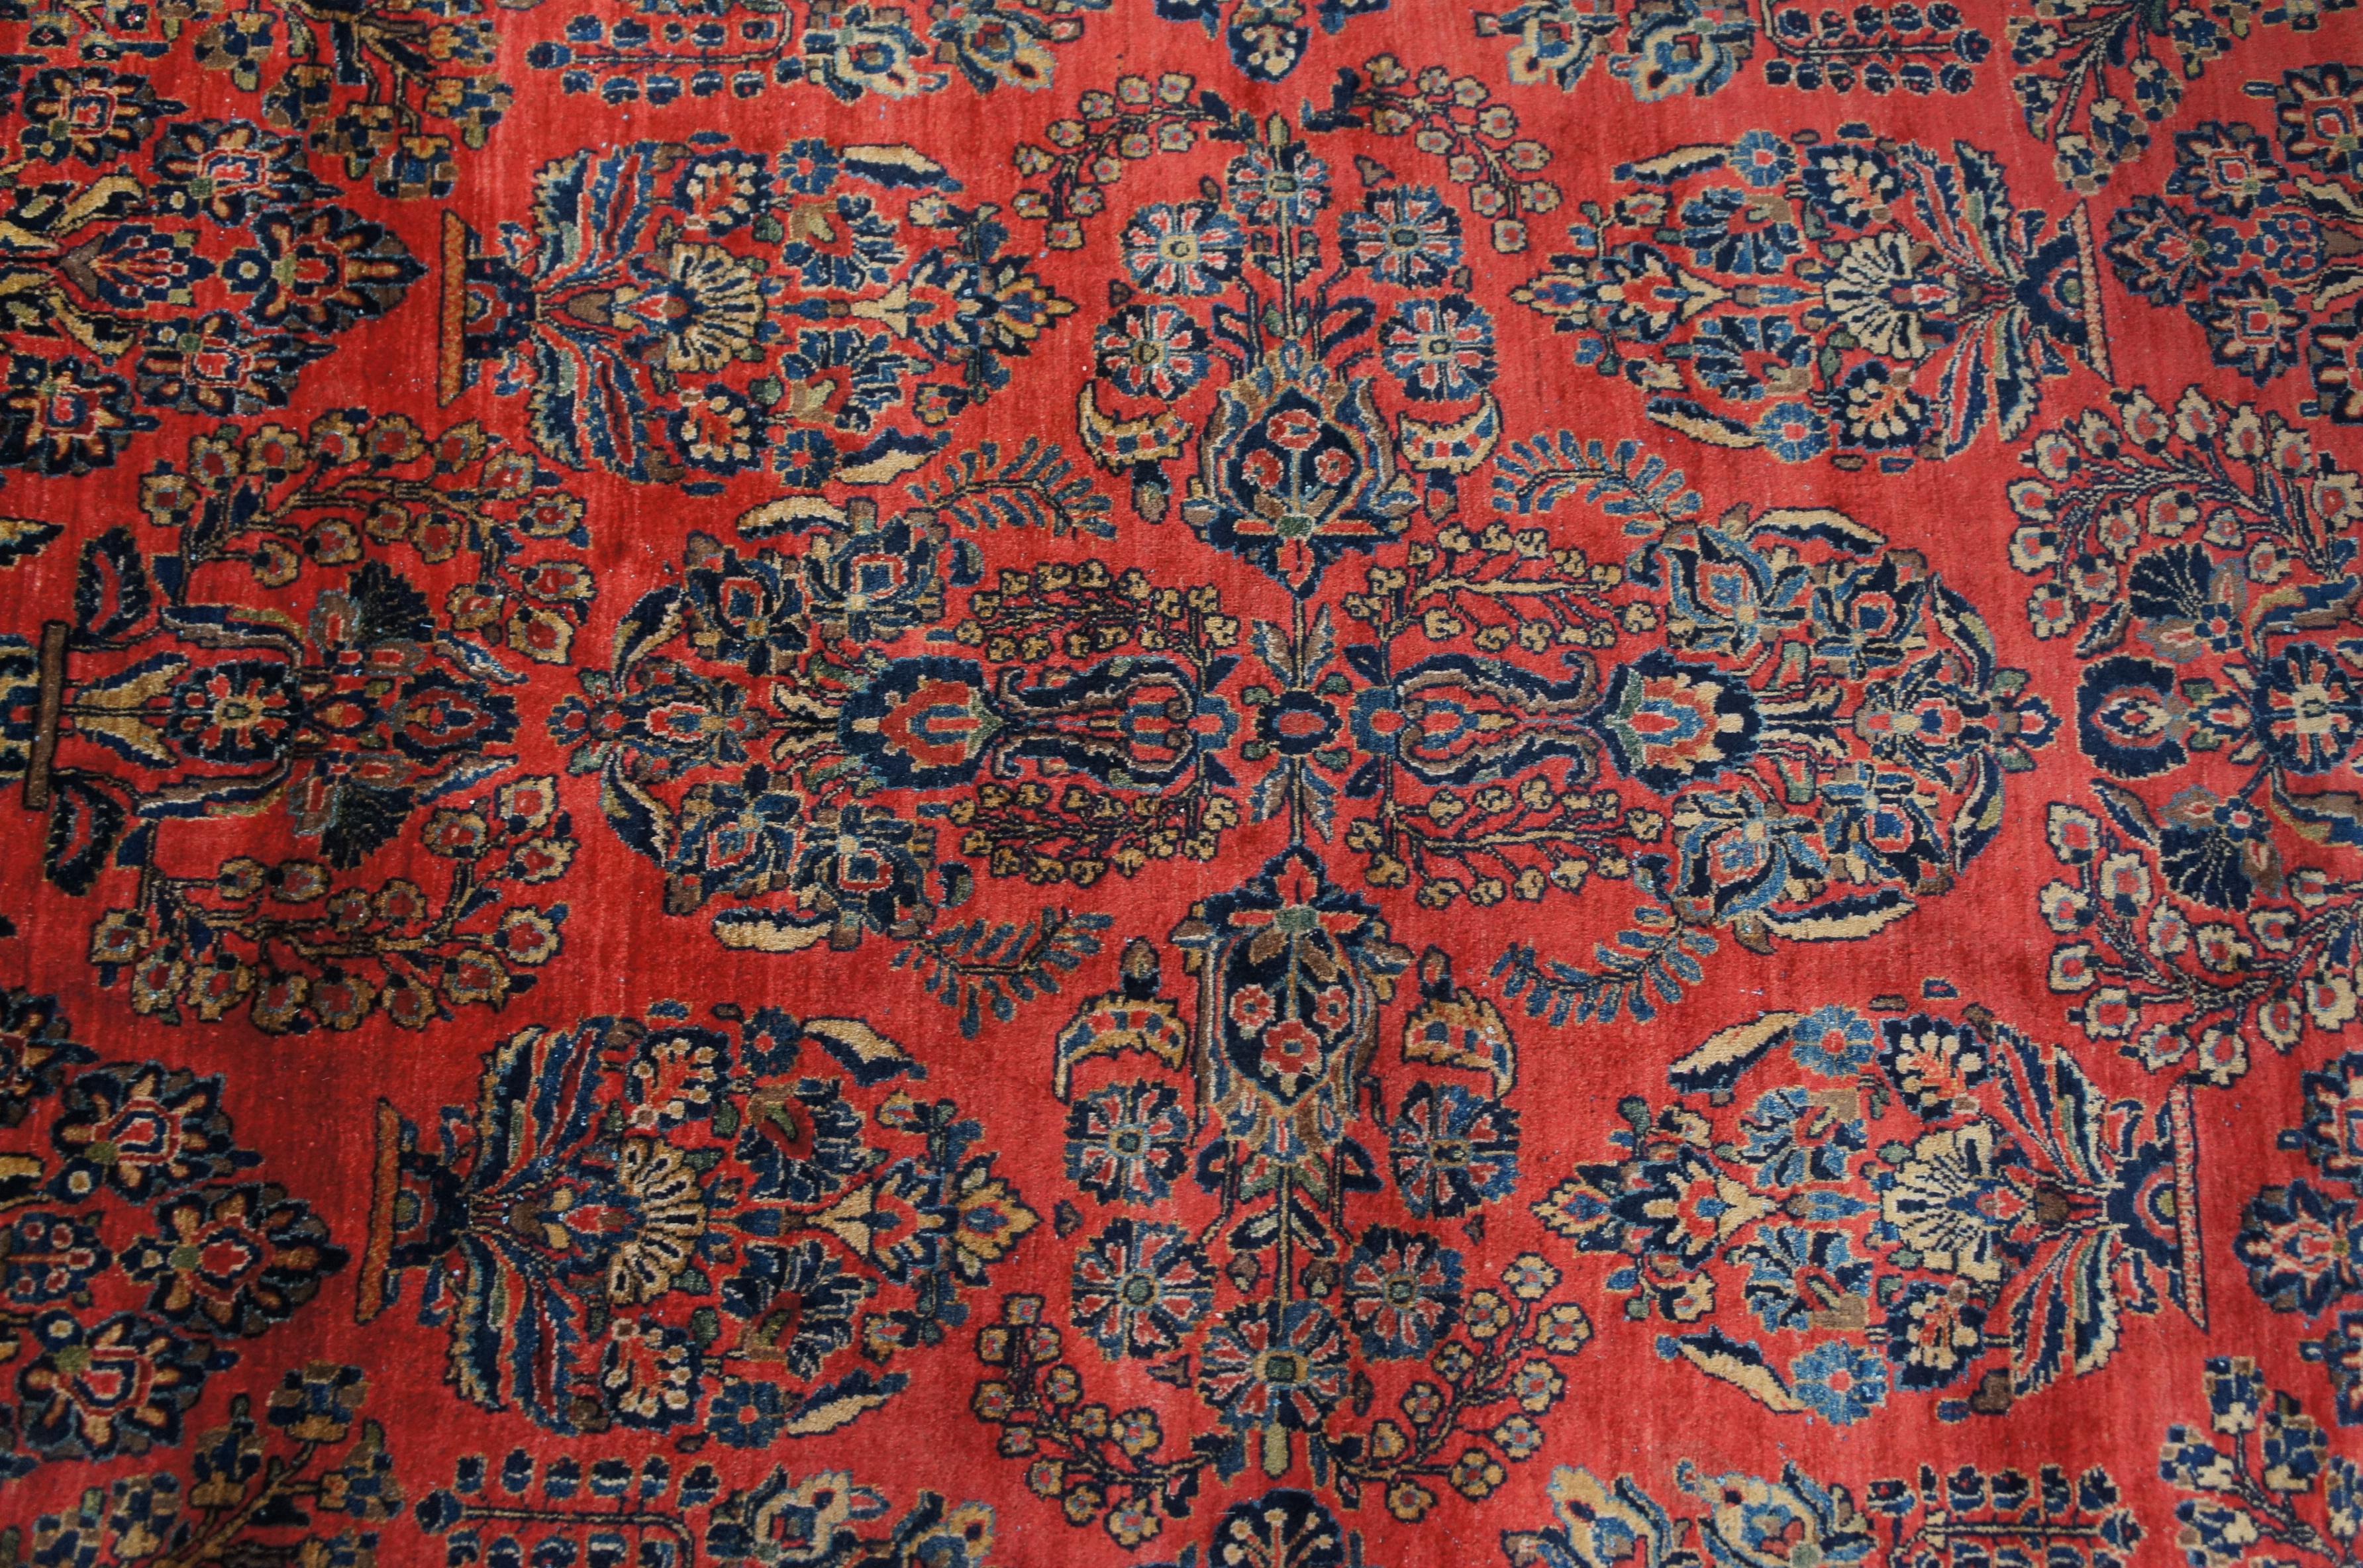 Vintage Persian Sarouk Hand Knotted Red Floral Wool Area Rug Carpet 9' x 12' For Sale 1